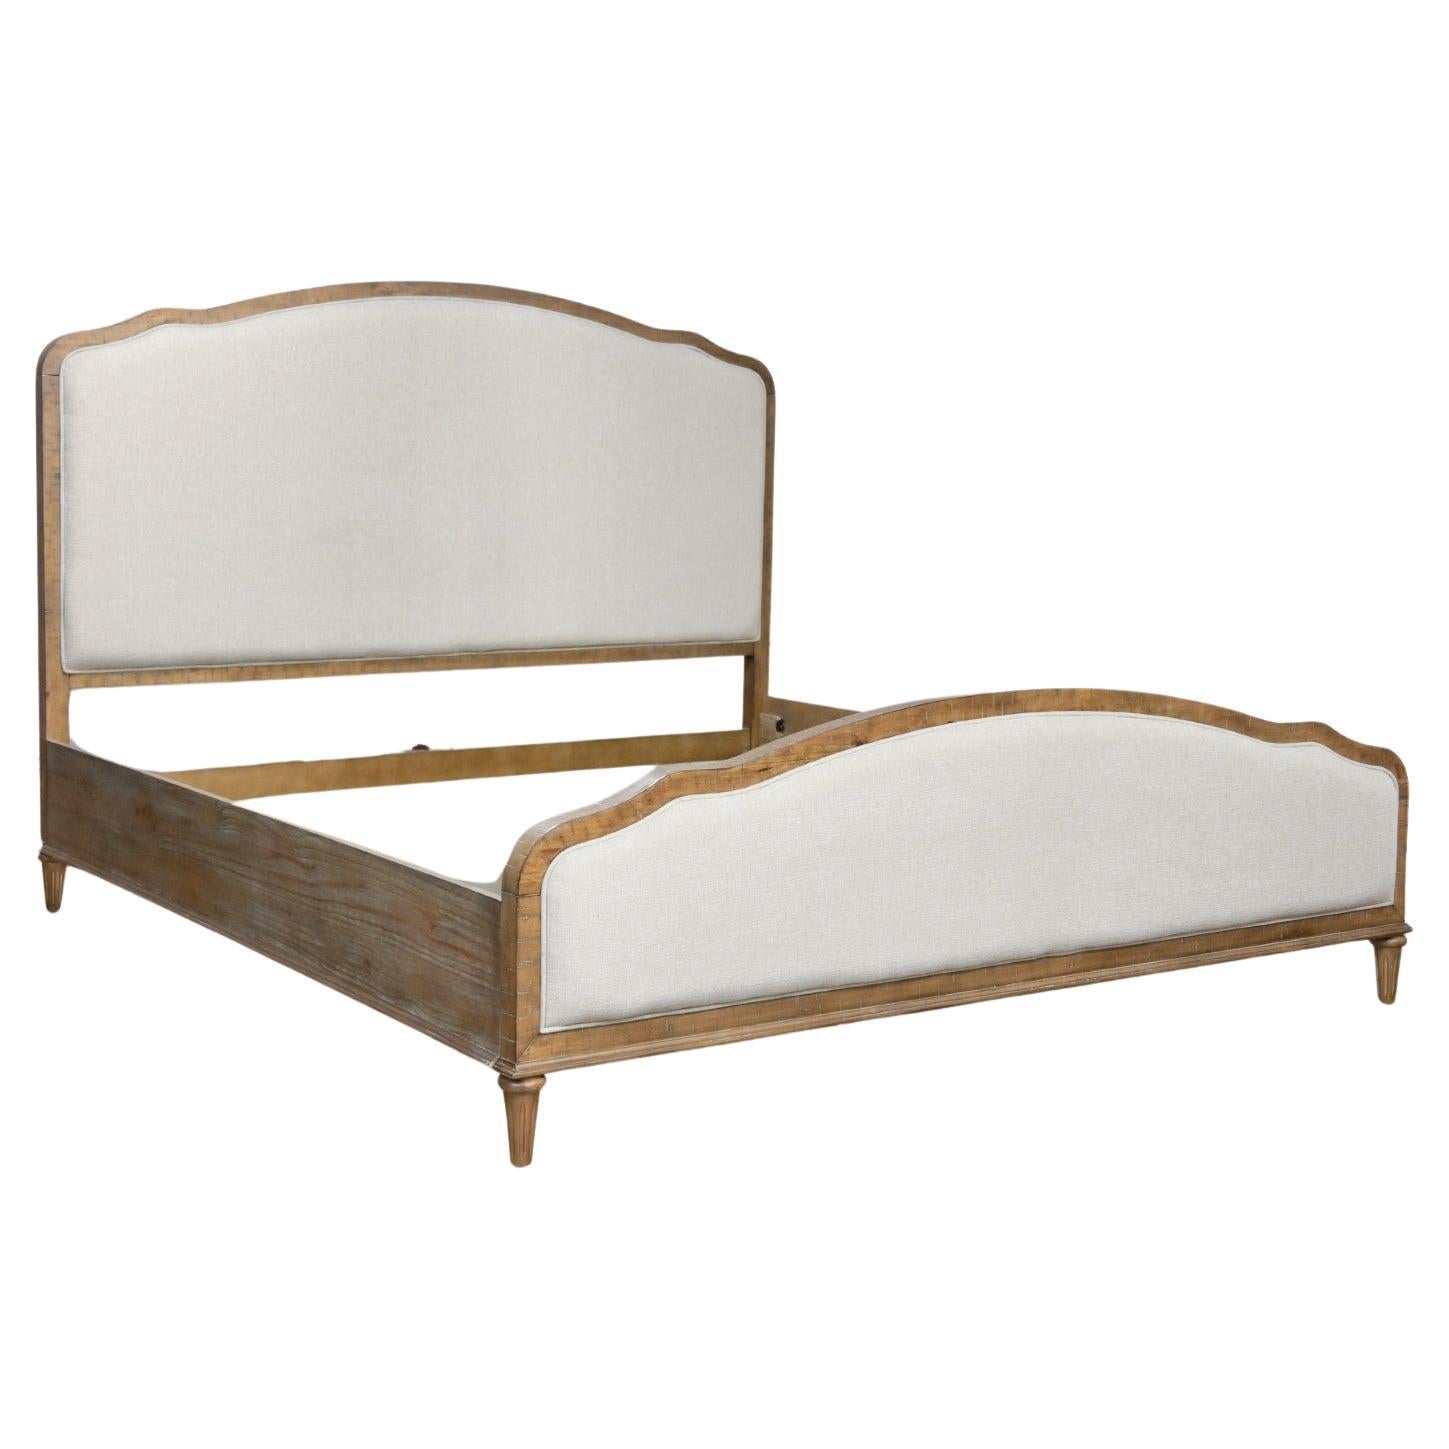 Early 21st Century French Country Rustic Mahogany & Upholstered King Size Bed For Sale